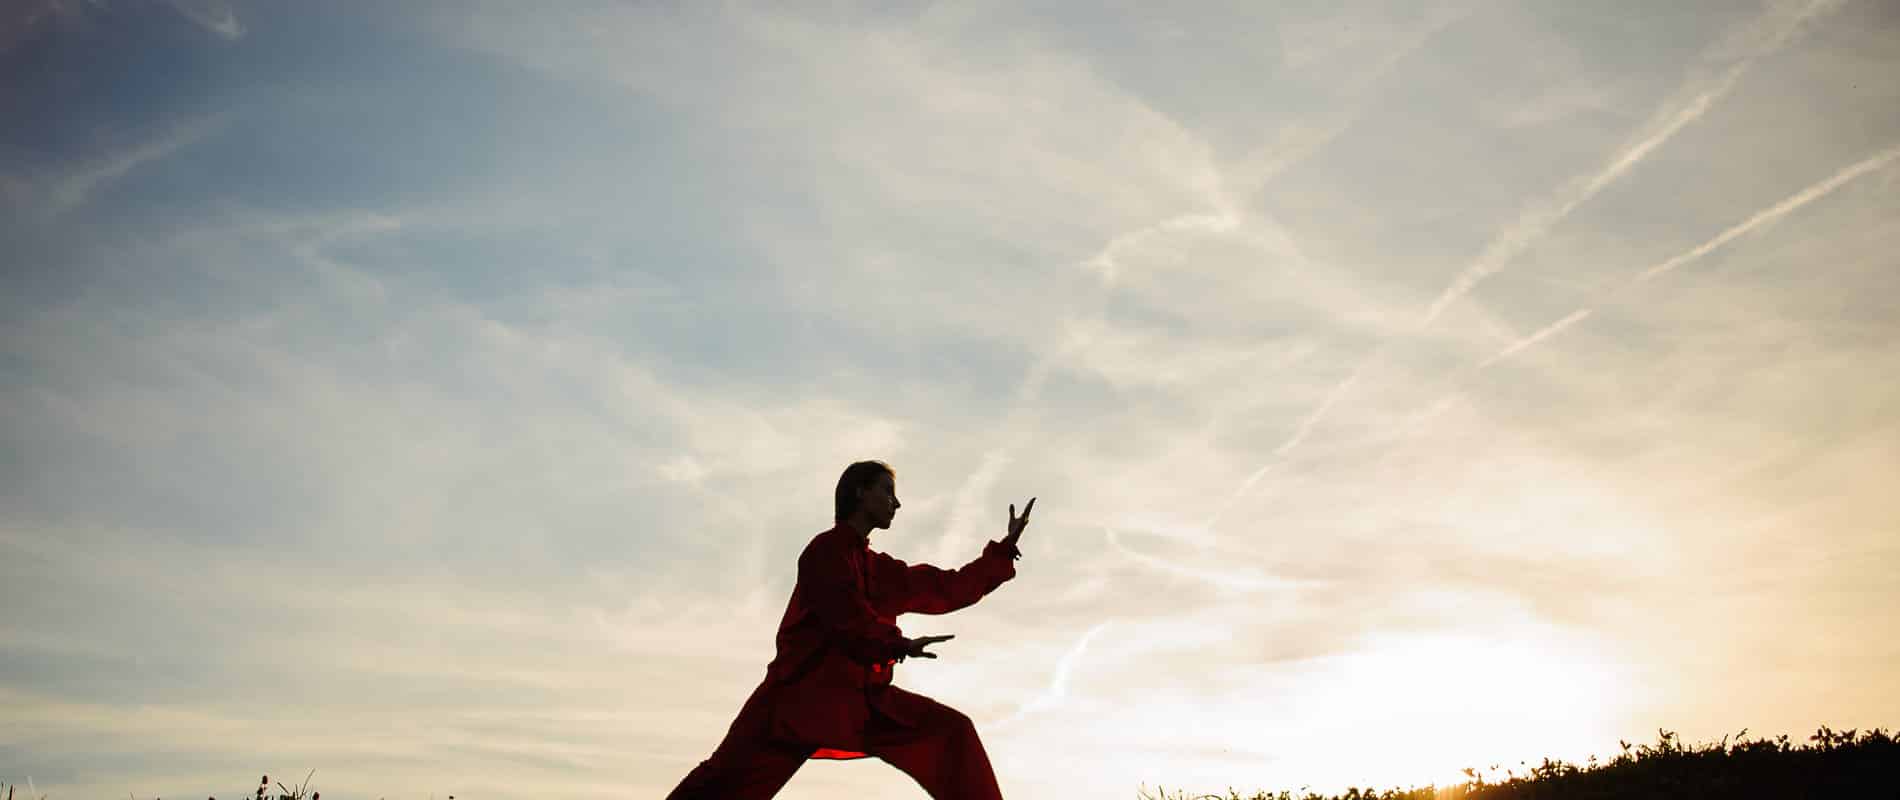 Silhouette of a man in red standing in a martial arts stance